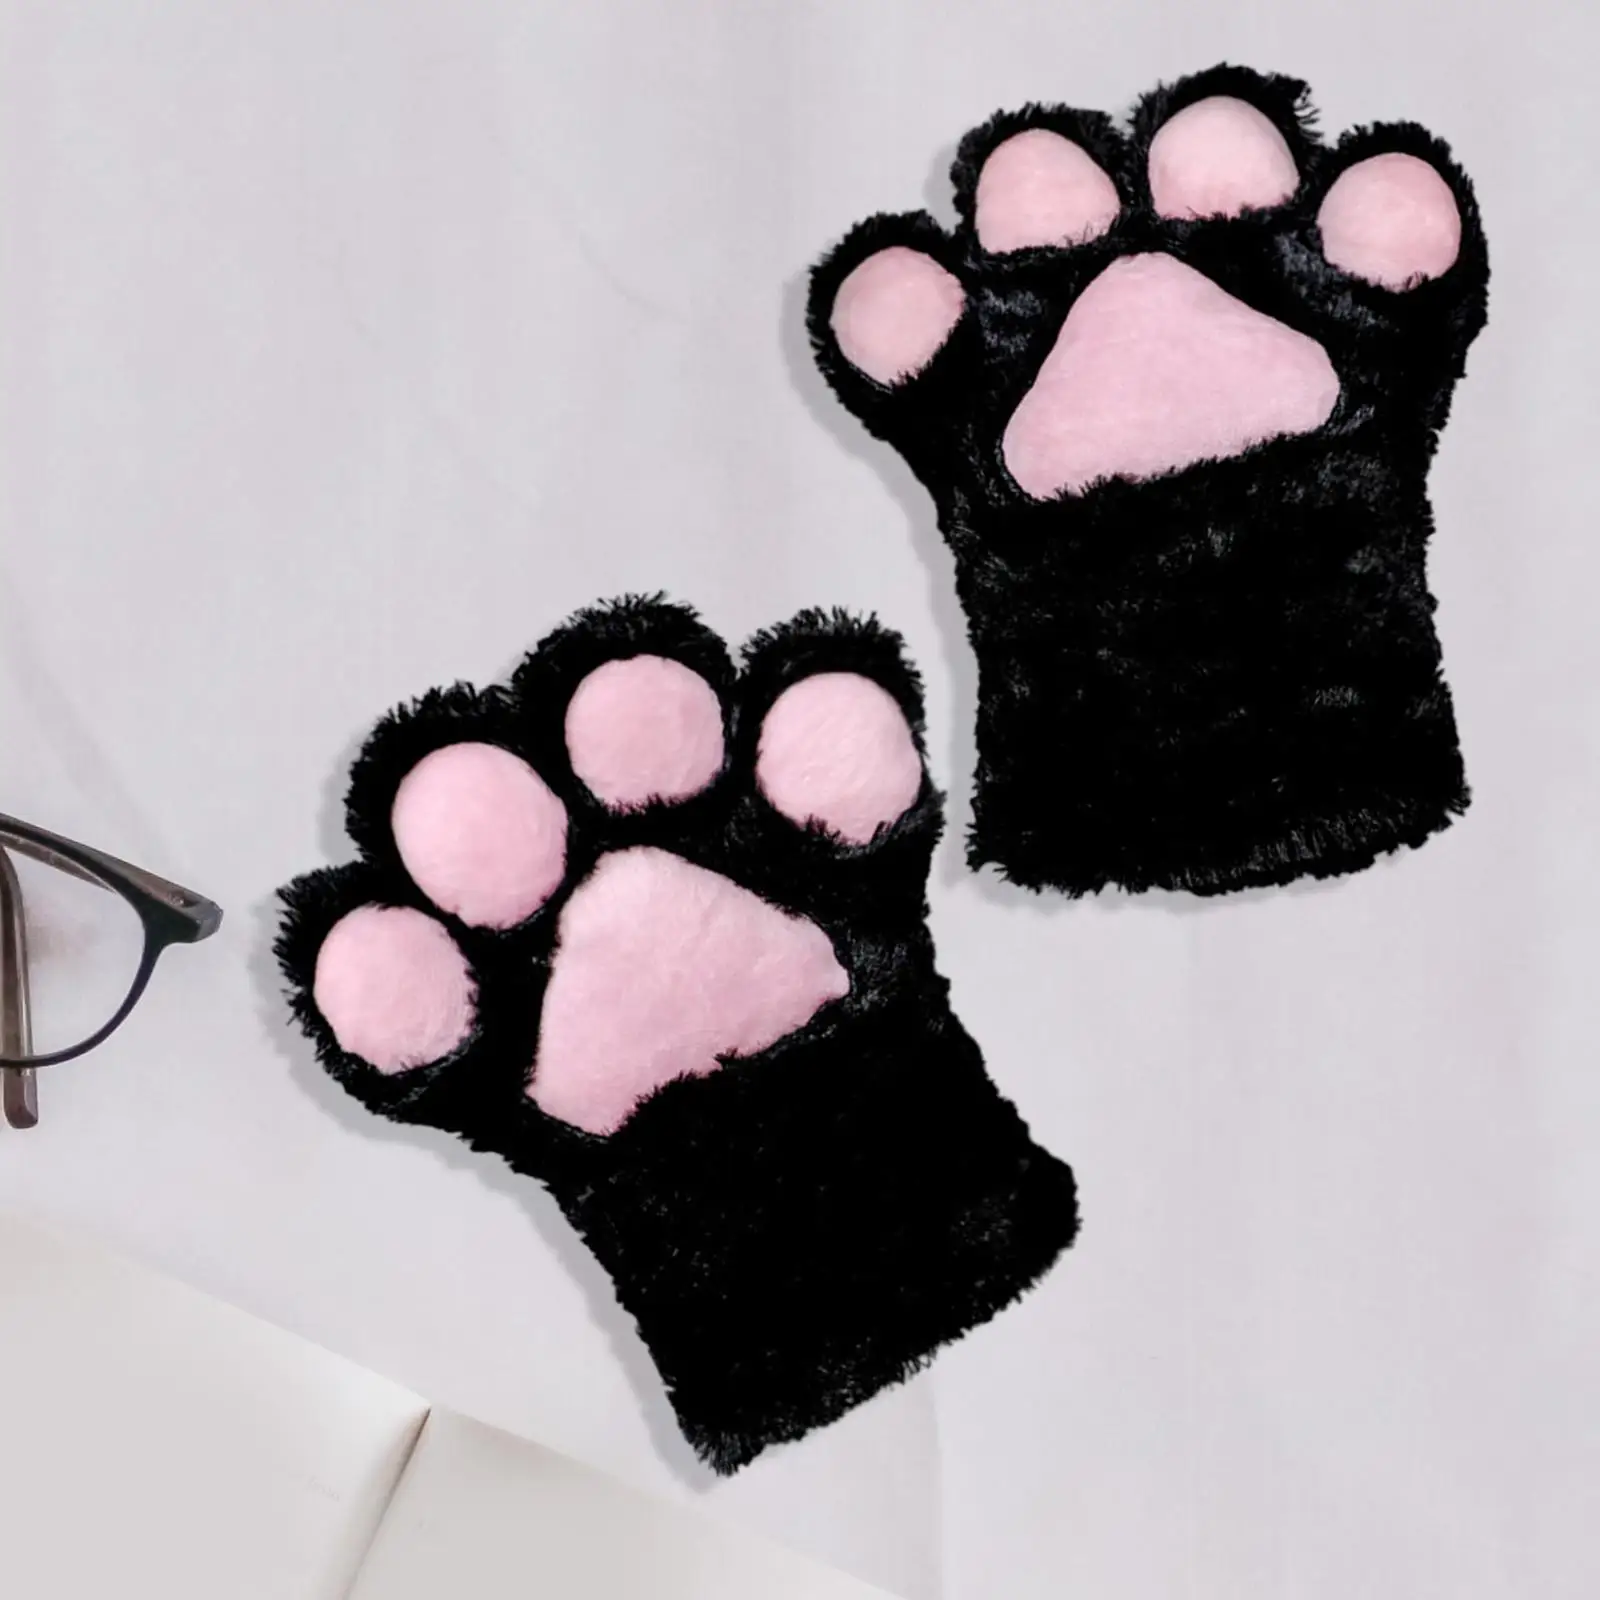  Paw Gloves Half Finger Gloves Warm Pv Flannel Soft for Party Halloween Womens Daughter Mom